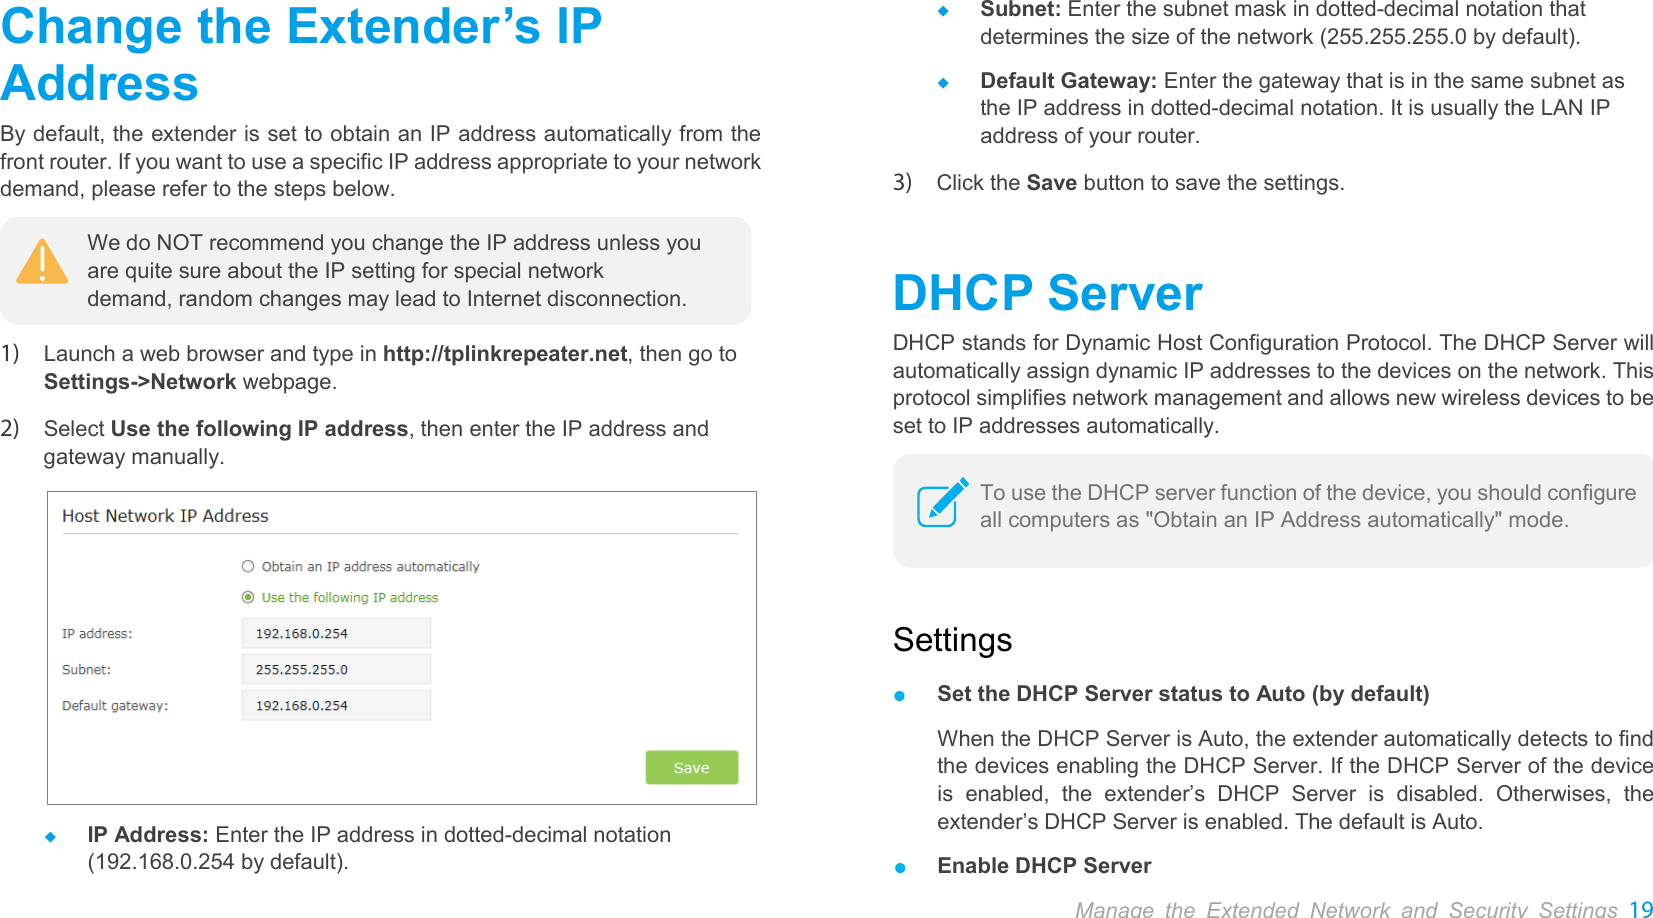  Change the Extender’s IP Address By default, the extender is set to obtain an IP address automatically from the front router. If you want to use a specific IP address appropriate to your network demand, please refer to the steps below.  1) Launch a web browser and type in http://tplinkrepeater.net, then go to Settings-&gt;Network webpage.   2) Select Use the following IP address, then enter the IP address and gateway manually.   IP Address: Enter the IP address in dotted-decimal notation (192.168.0.254 by default).  Subnet: Enter the subnet mask in dotted-decimal notation that determines the size of the network (255.255.255.0 by default).  Default Gateway: Enter the gateway that is in the same subnet as the IP address in dotted-decimal notation. It is usually the LAN IP address of your router. 3) Click the Save button to save the settings. DHCP Server DHCP stands for Dynamic Host Configuration Protocol. The DHCP Server will automatically assign dynamic IP addresses to the devices on the network. This protocol simplifies network management and allows new wireless devices to be set to IP addresses automatically.  Settings ● Set the DHCP Server status to Auto (by default) When the DHCP Server is Auto, the extender automatically detects to find the devices enabling the DHCP Server. If the DHCP Server of the device is enabled, the  extender’s DHCP Server is disabled. Otherwises, the extender’s DHCP Server is enabled. The default is Auto. ● Enable DHCP Server We do NOT recommend you change the IP address unless you are quite sure about the IP setting for special network demand, random changes may lead to Internet disconnection. To use the DHCP server function of the device, you should configure all computers as &quot;Obtain an IP Address automatically&quot; mode. Manage the Extended Network and Security Settings 19  